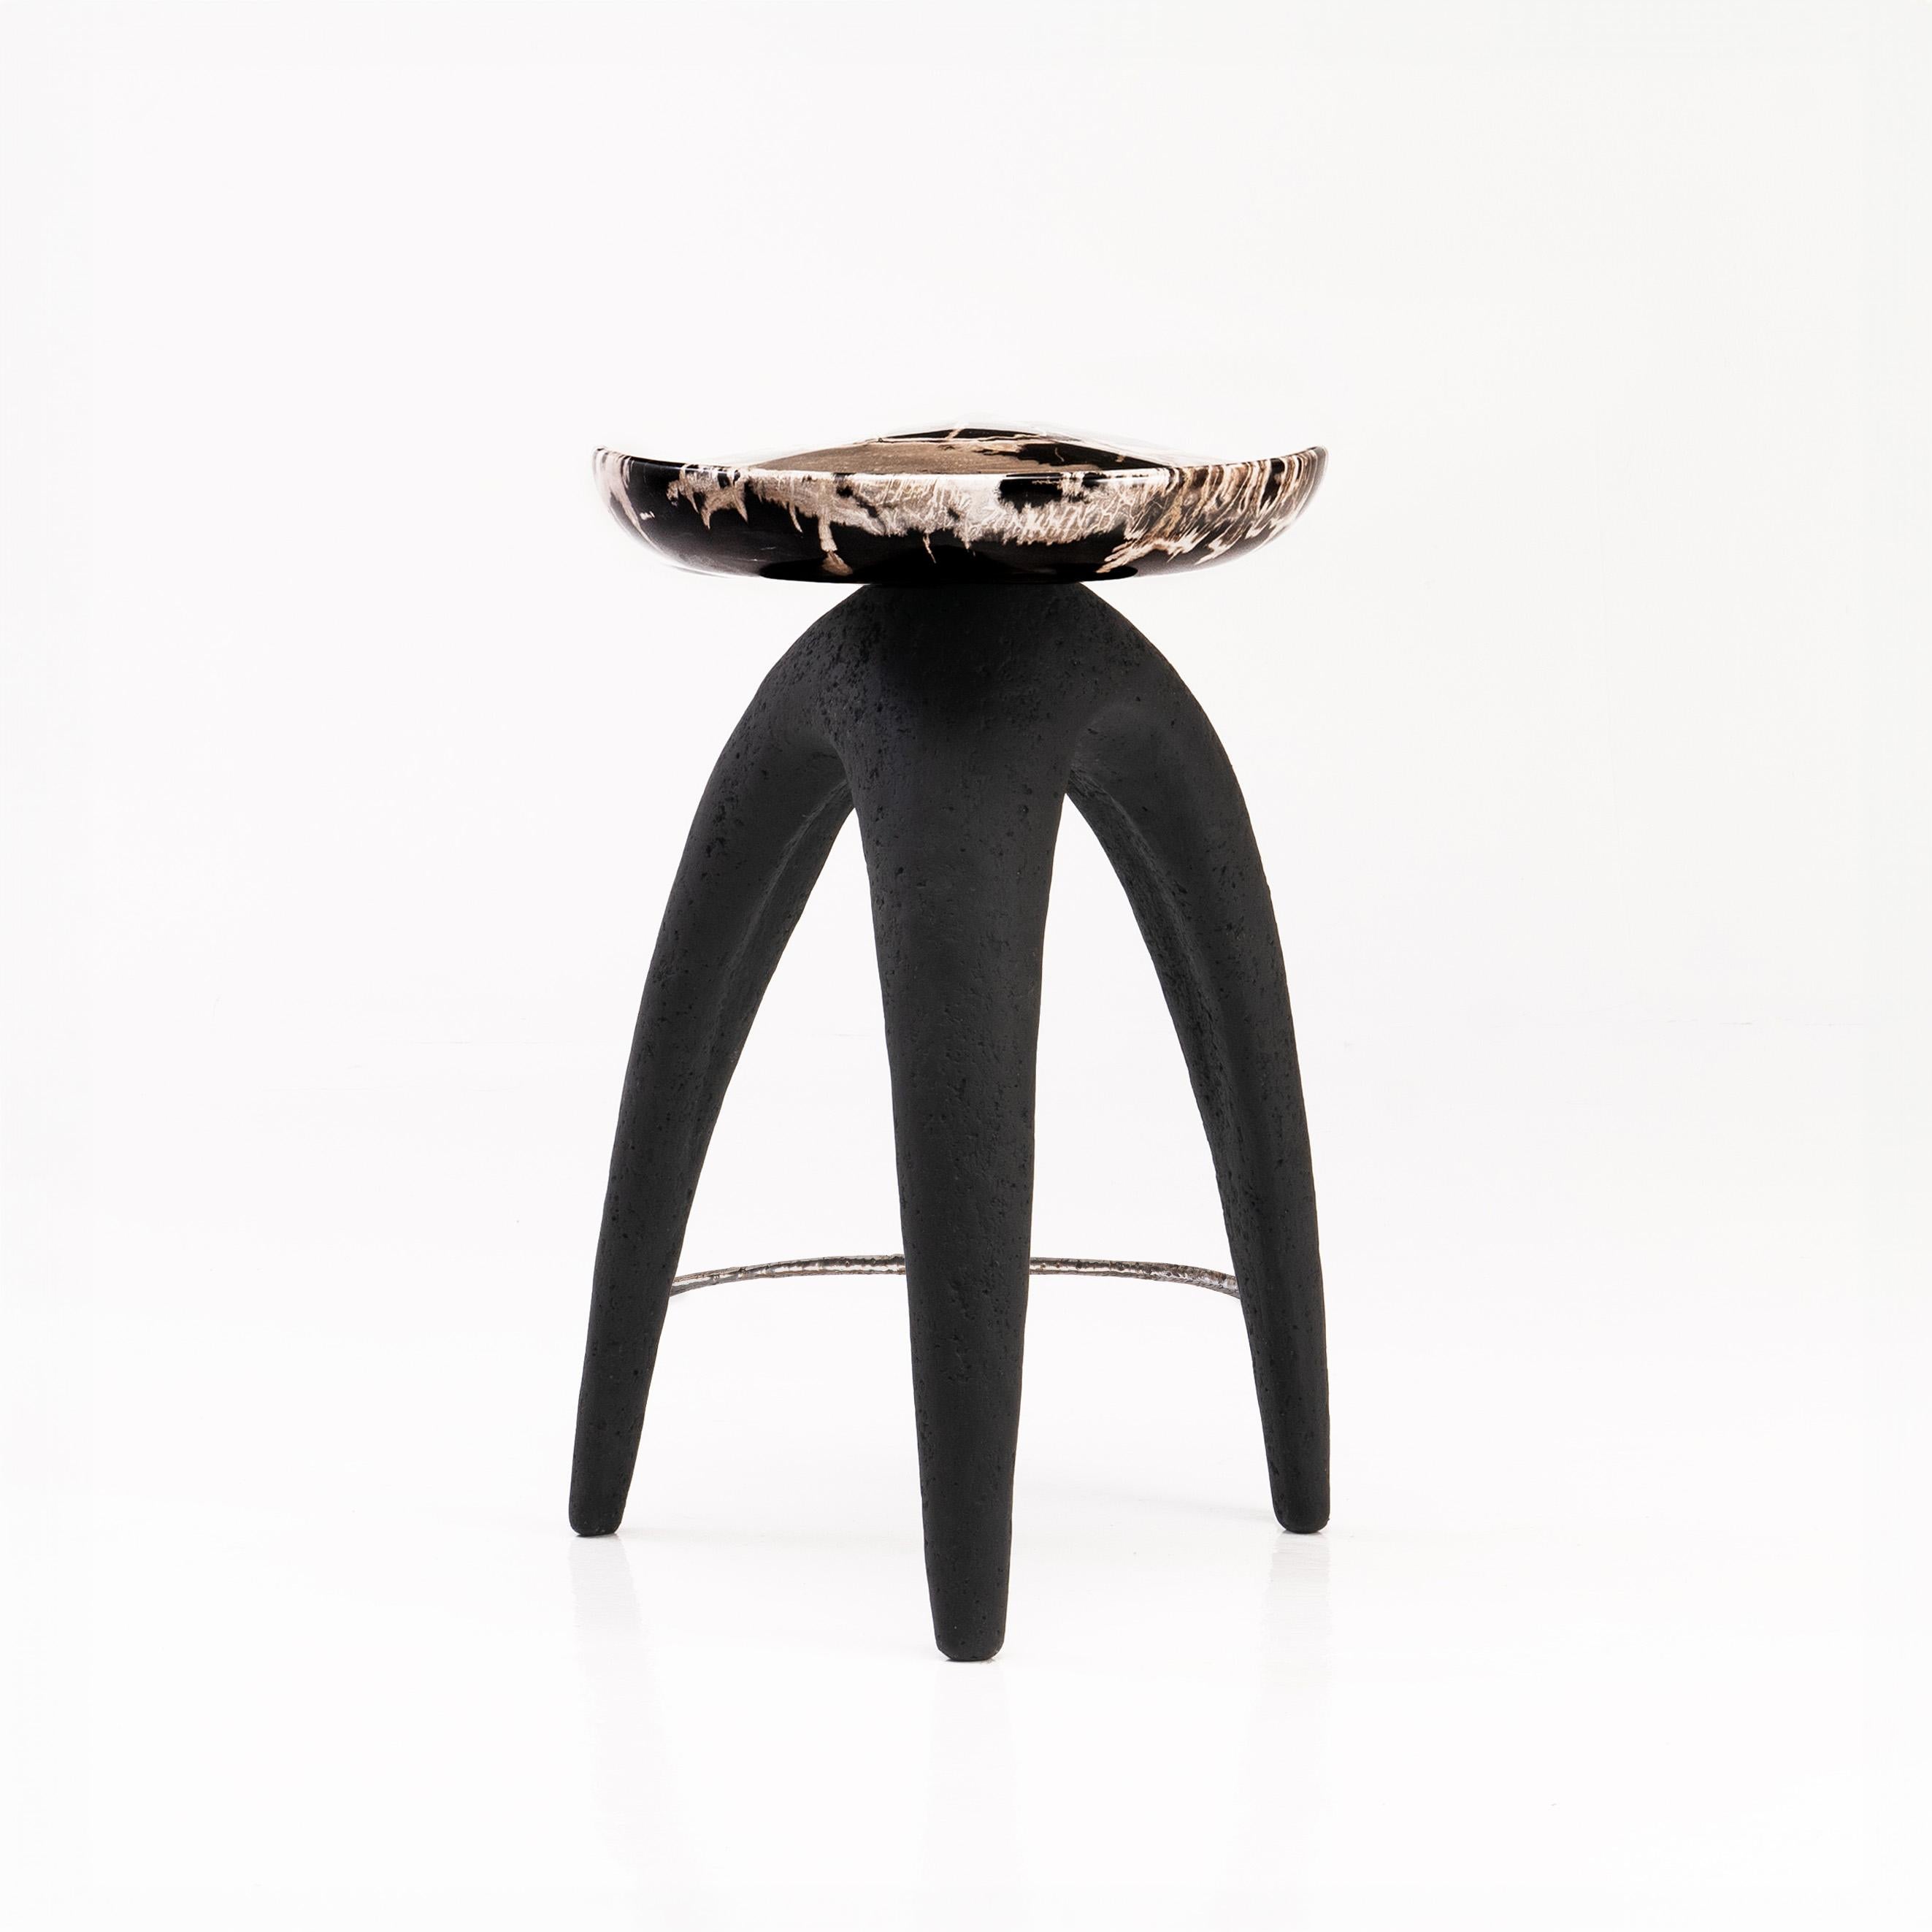 The ‘Bermuda Triangle’ sculptural stool features a solid hand-carved petrified wood saddle seat, perched upon an organic shaped tripod base made from lava stone composite.
 
Petrified wood is created from fossilised trees transformed into stone by a